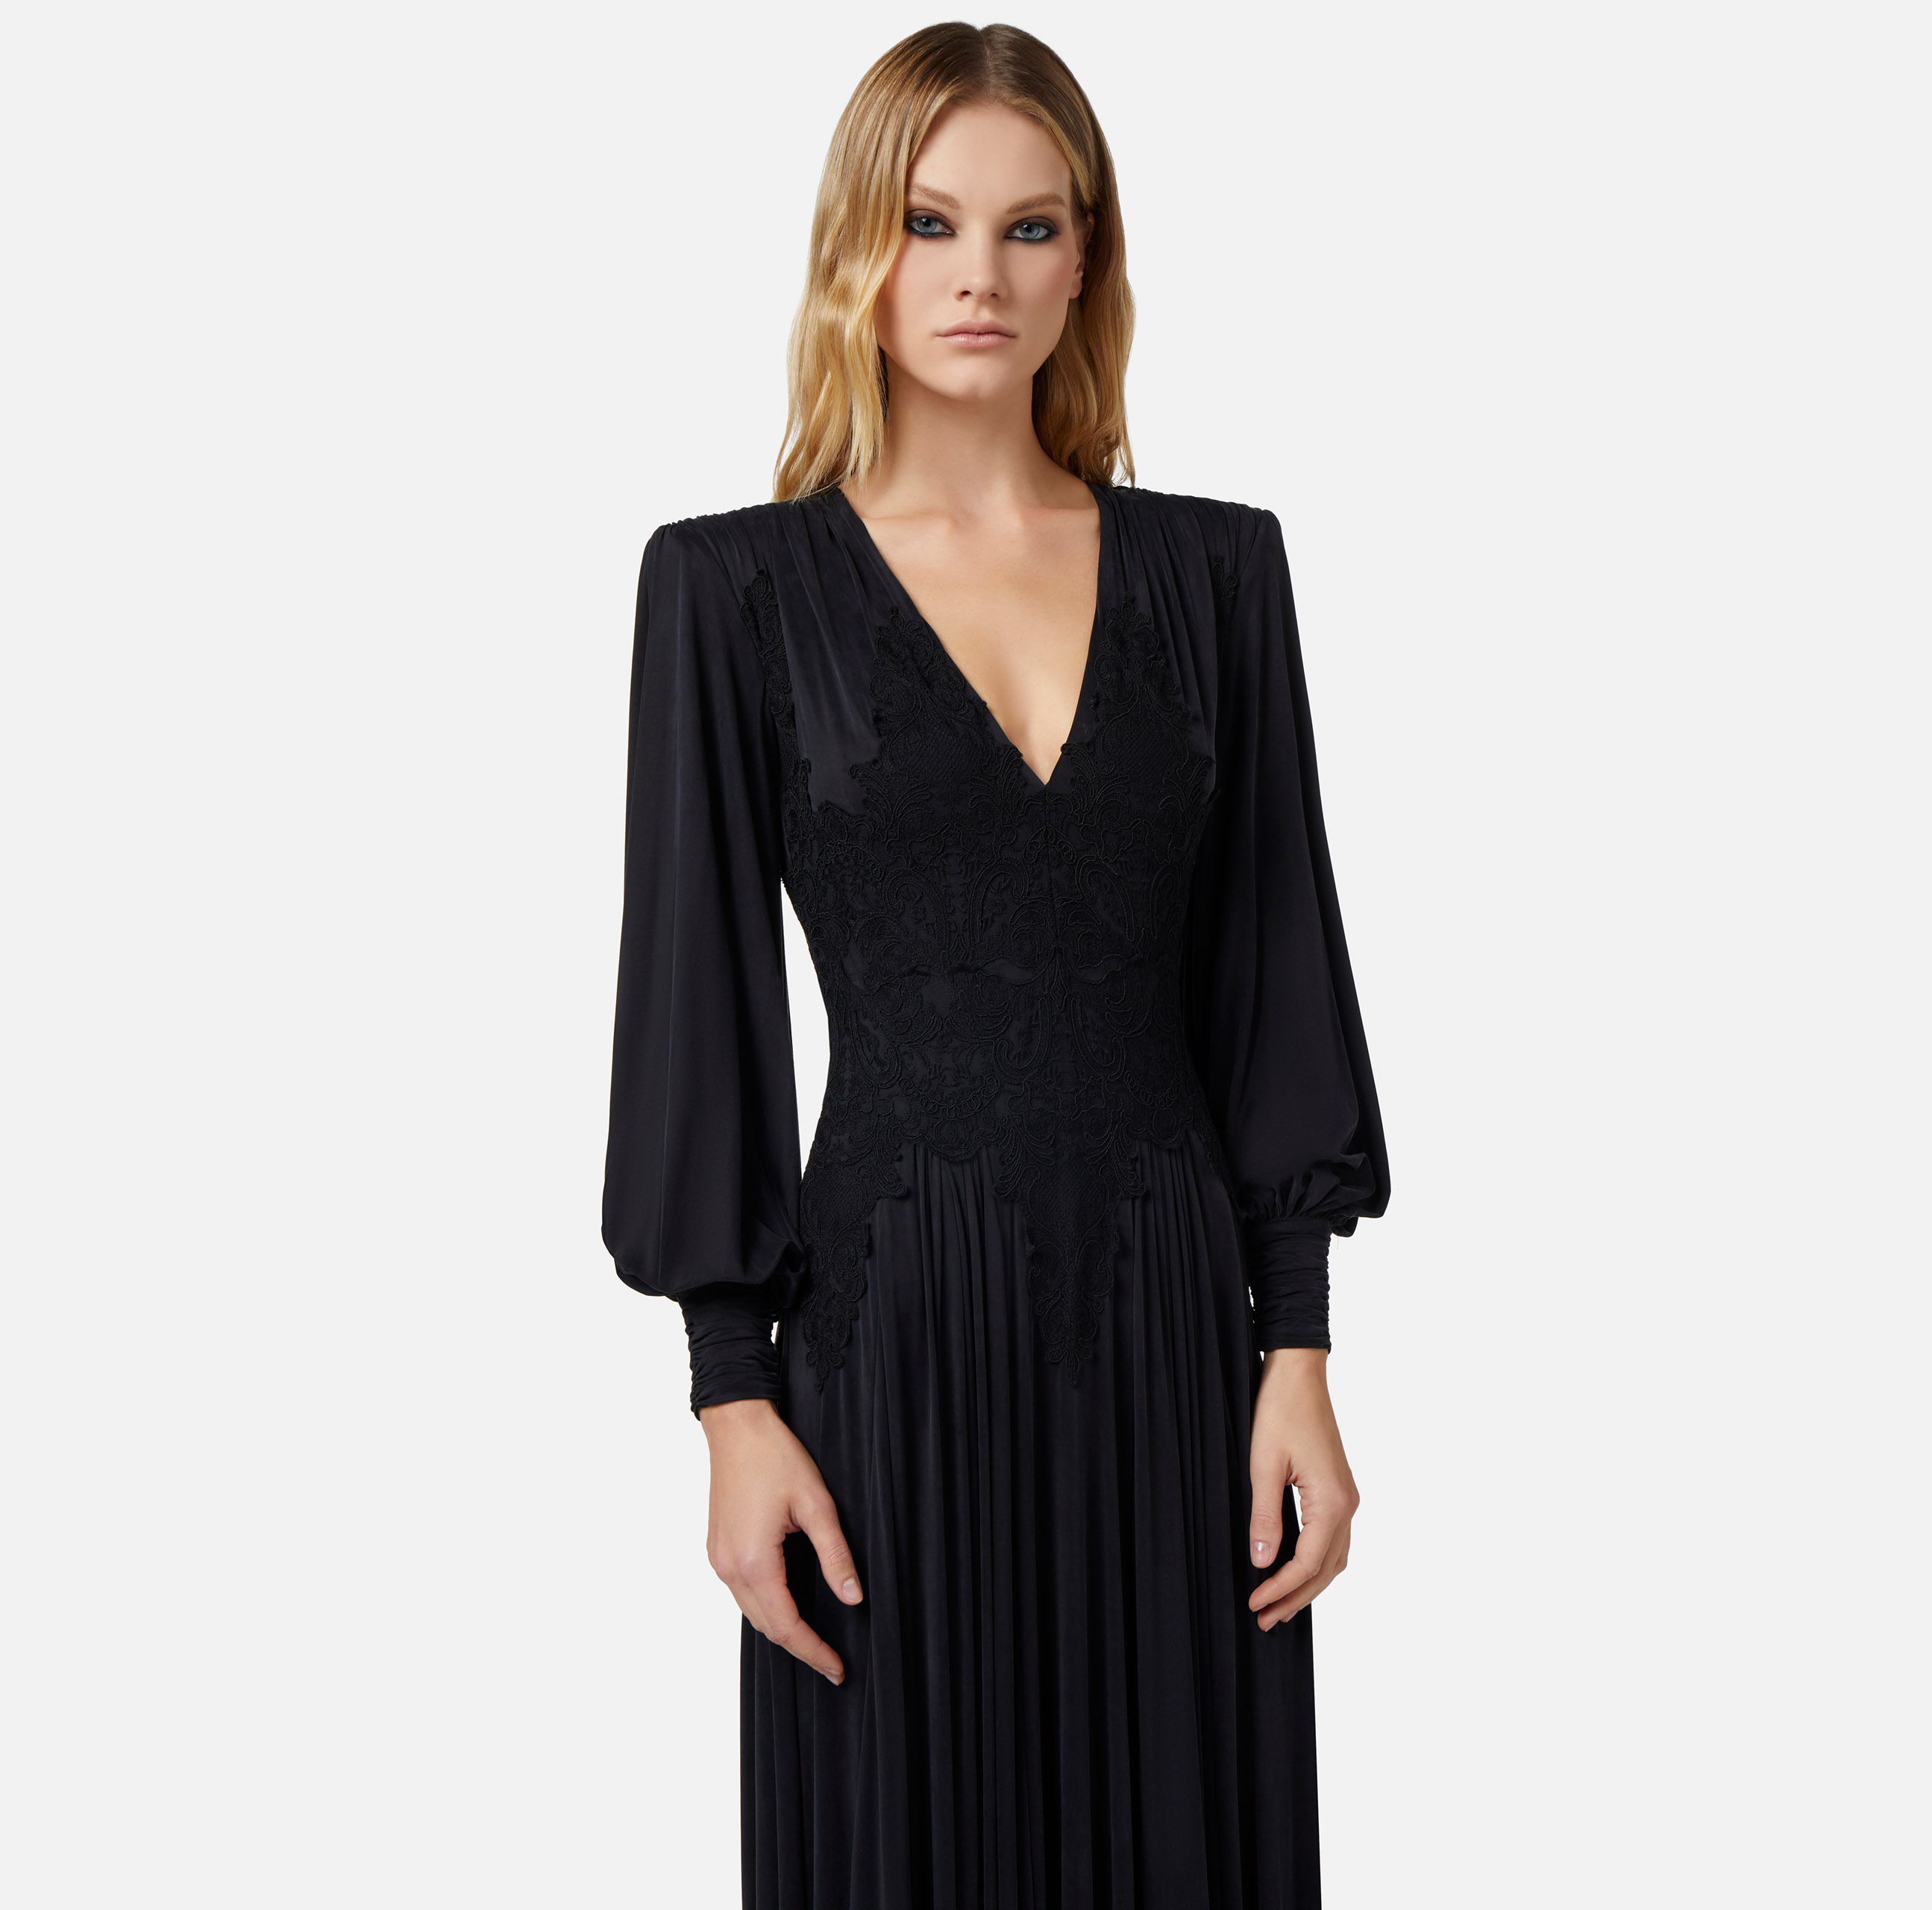 Jersey red carpet dress with lace inserts - Elisabetta Franchi